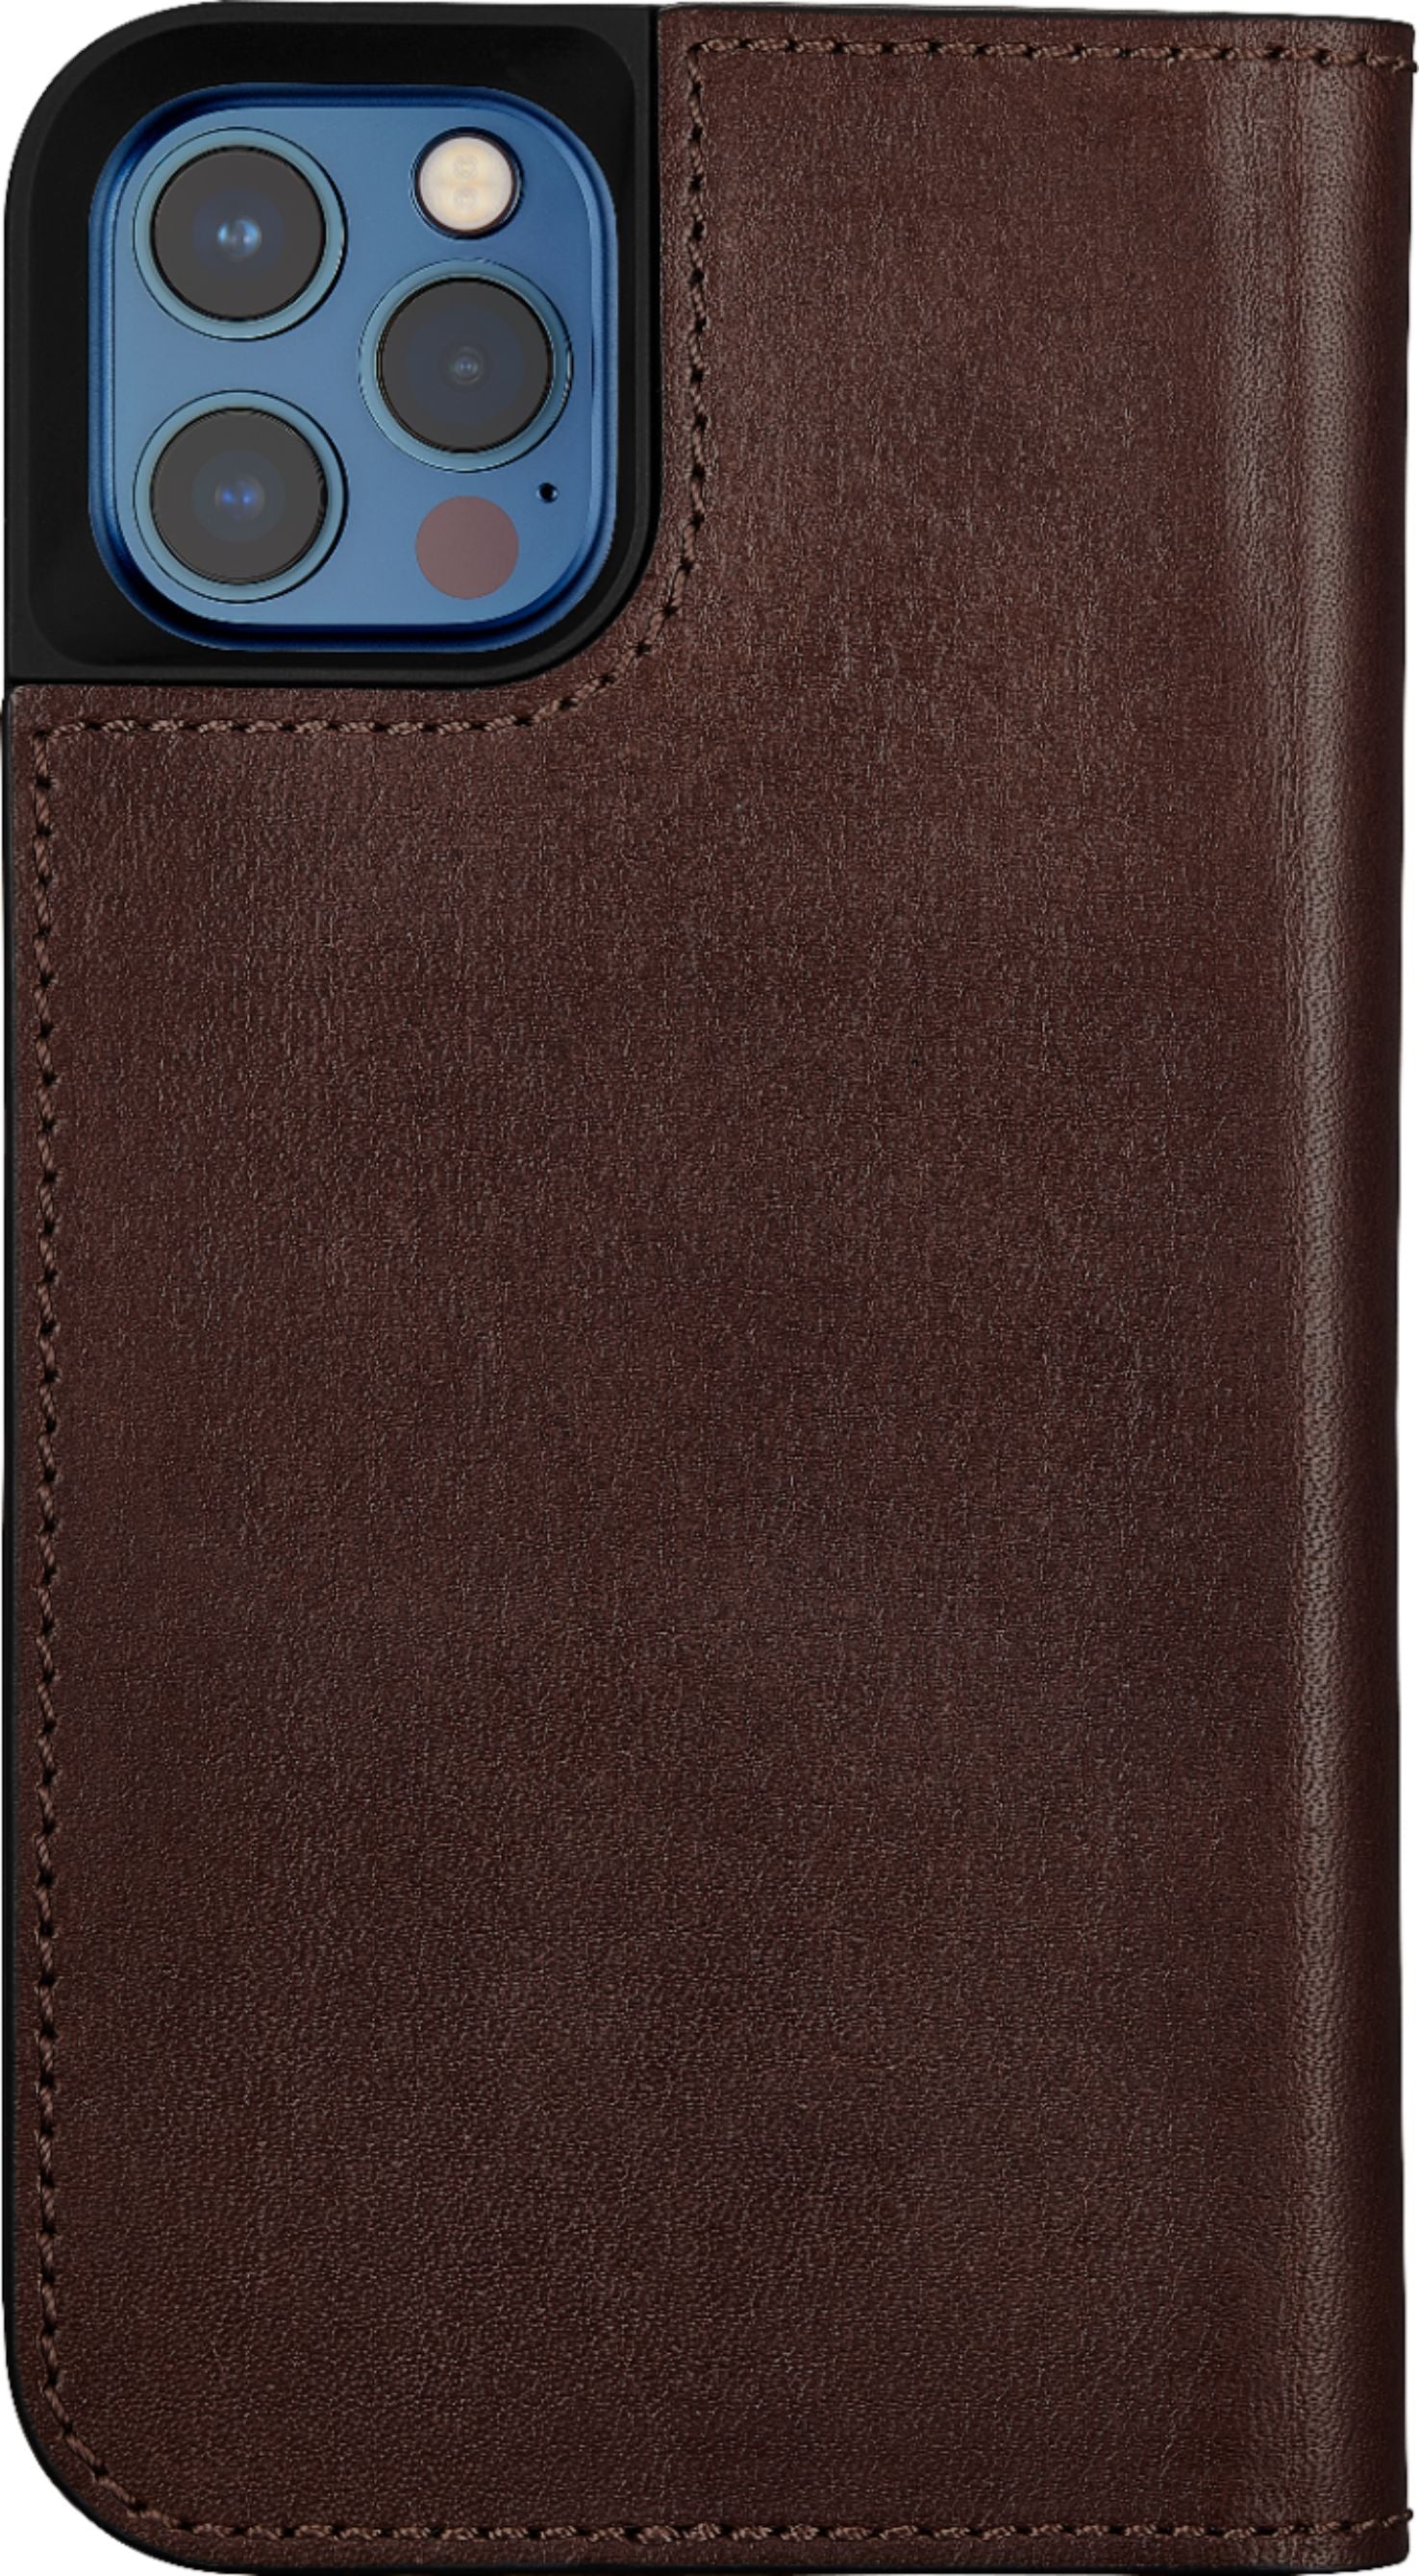 Apple iPhone Leather Wallet with MHLT3ZM/A, Bags and sleeves for  smartphones